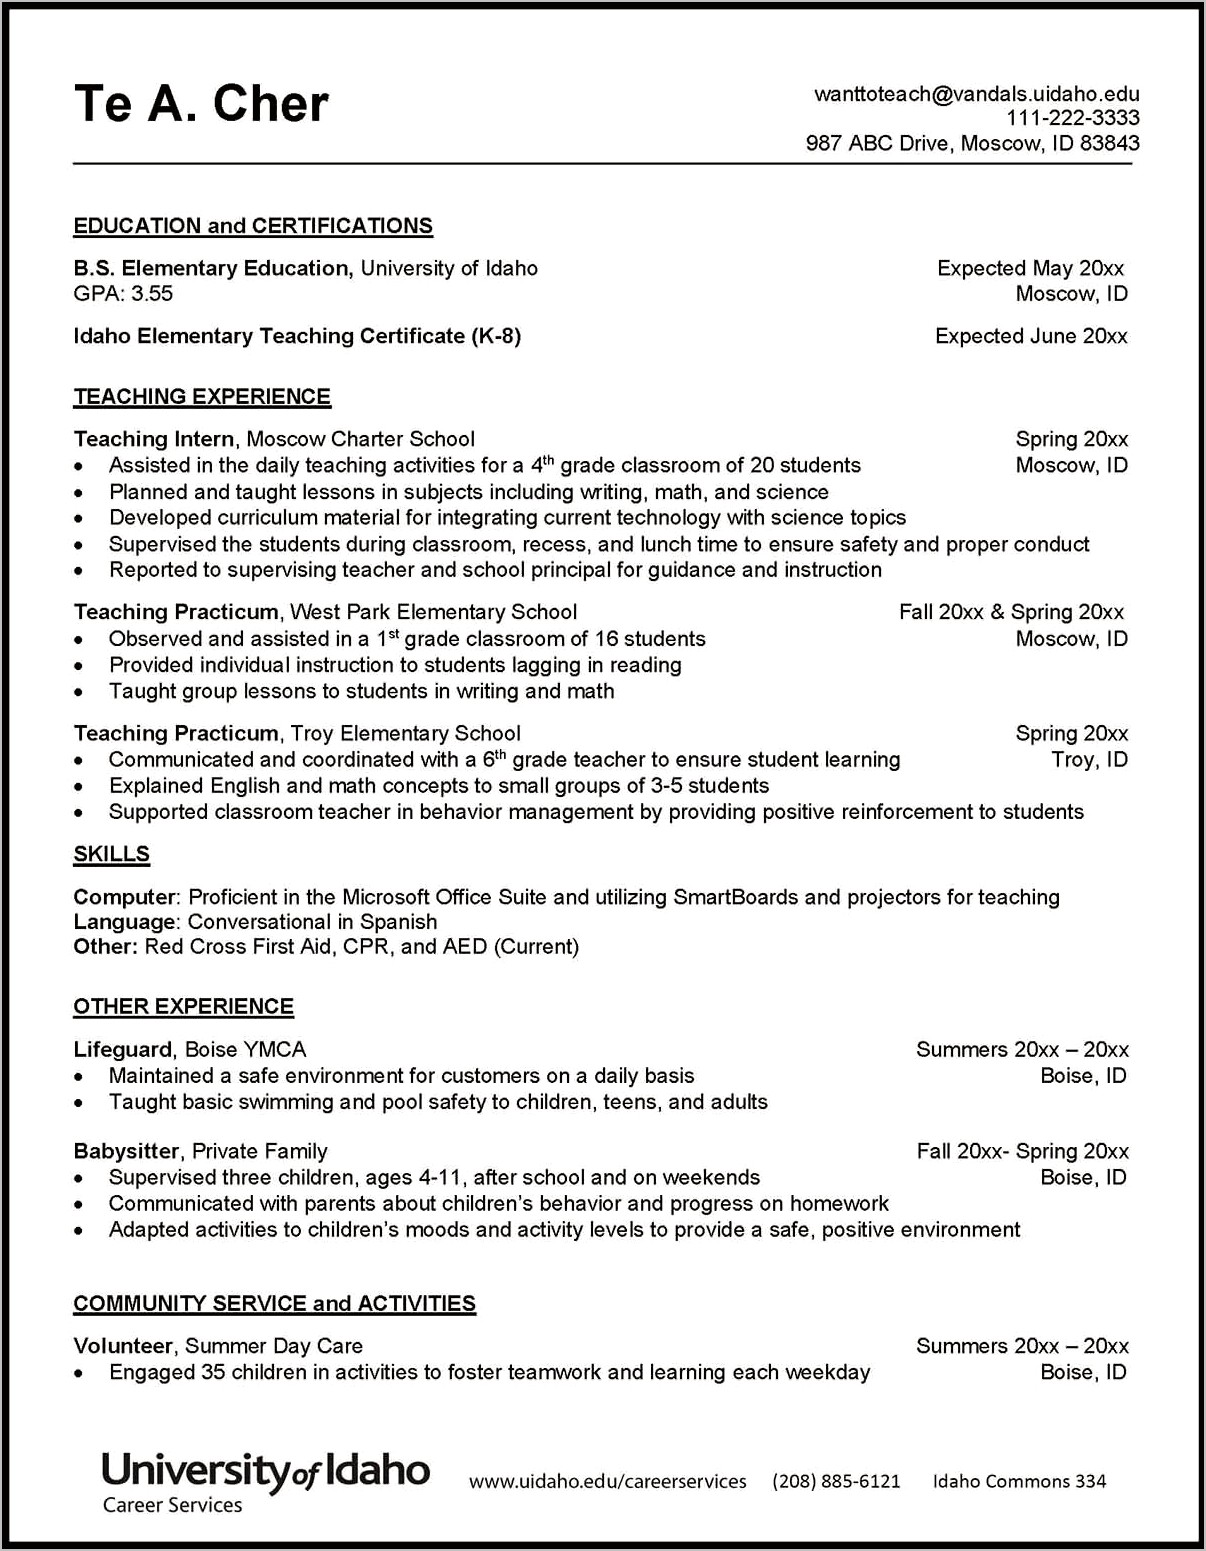 Sample Resume With Current Education